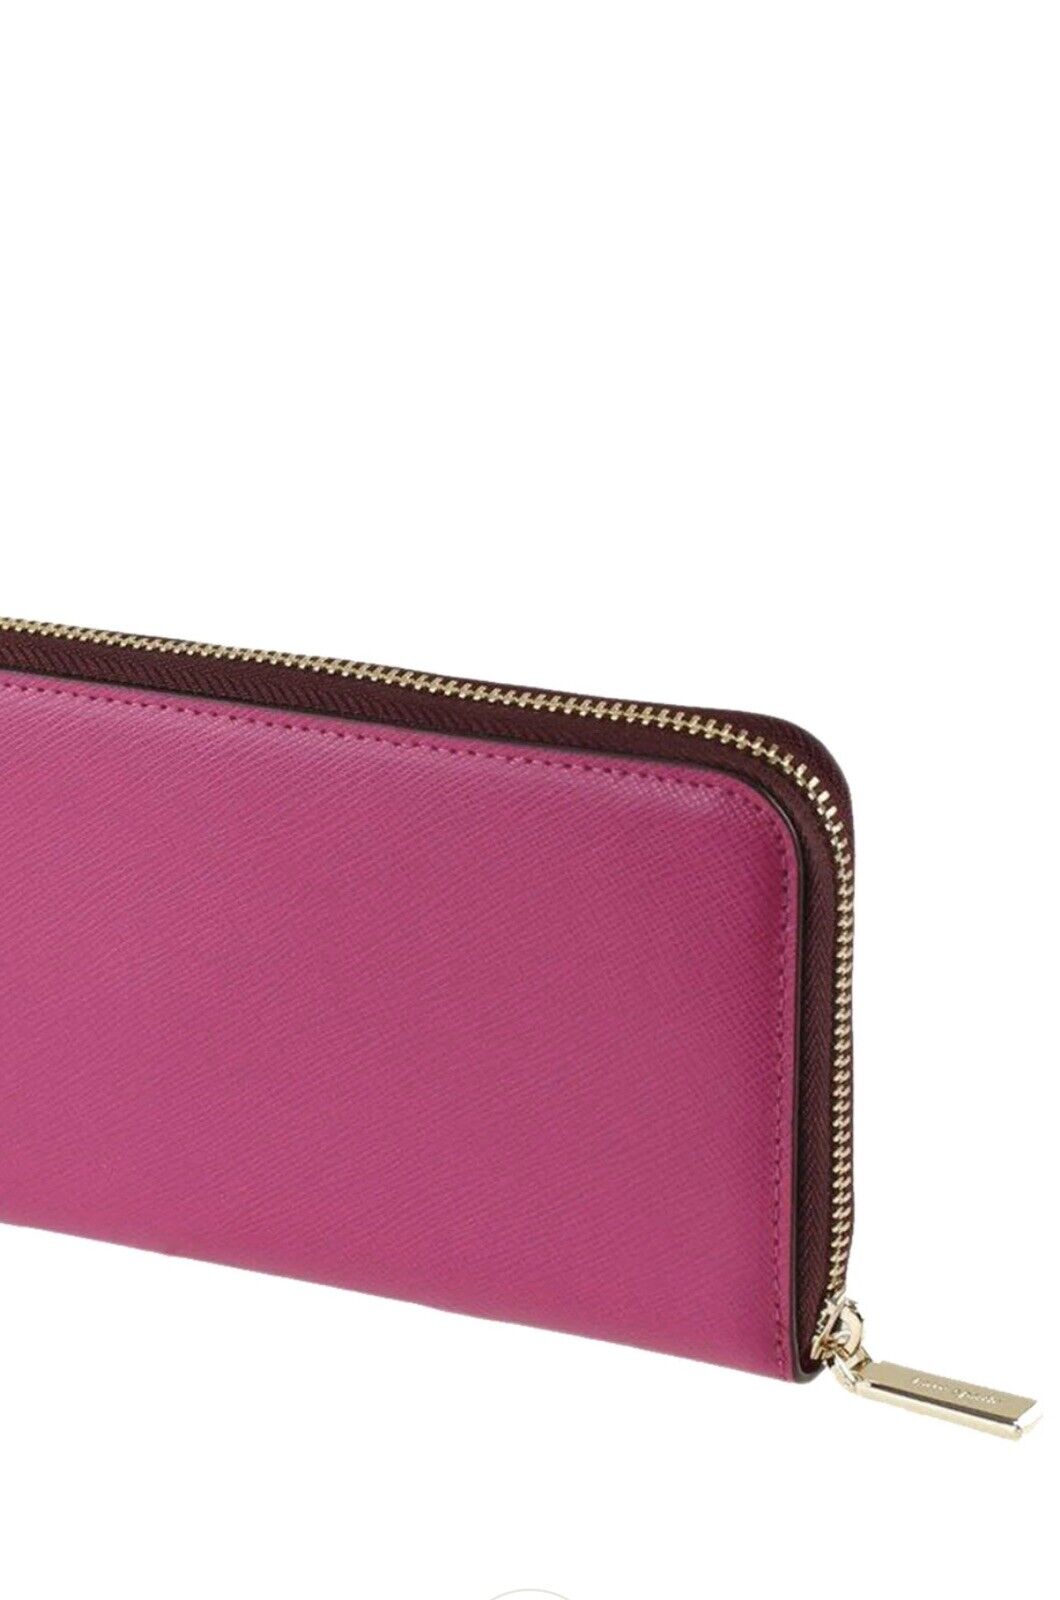 KATE SPADE STACI COLORBLOCK SAFFIANO LEATHER CLUTCH WALLET – The